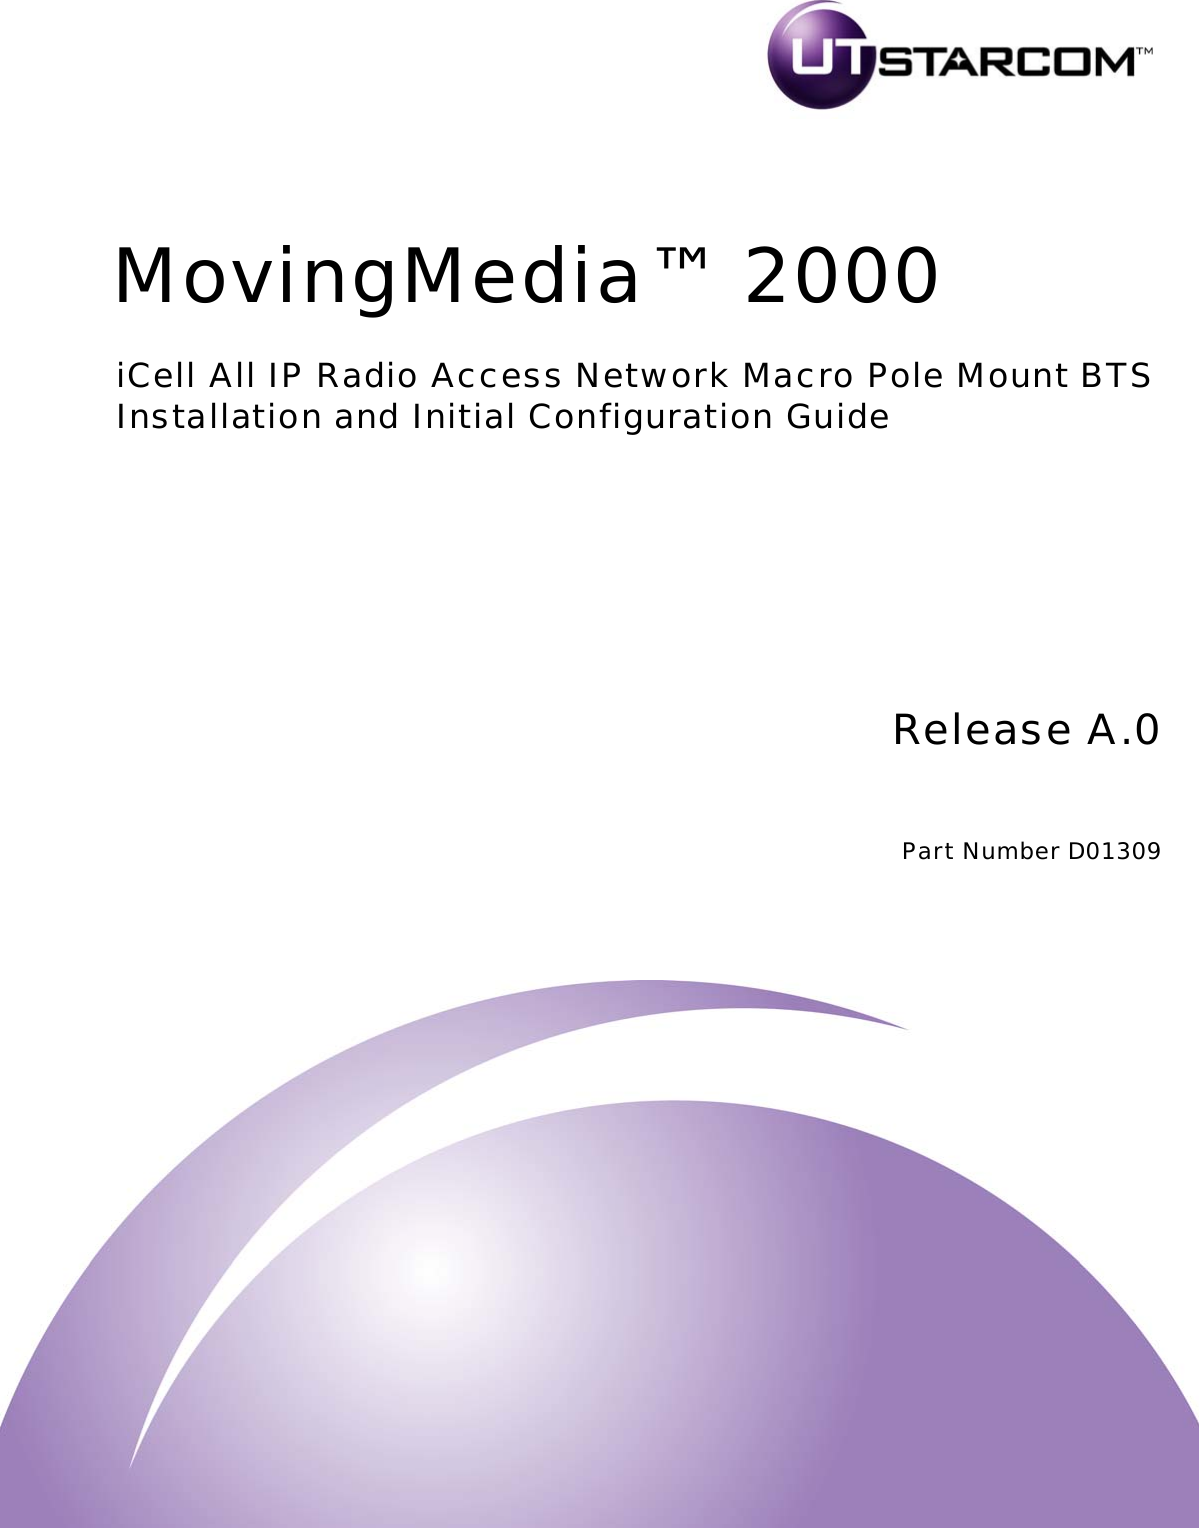 Release A.0Part Number D01309iCell All IP Radio Access Network Macro Pole Mount BTSInstallation and Initial Configuration GuideMovingMedia™ 2000